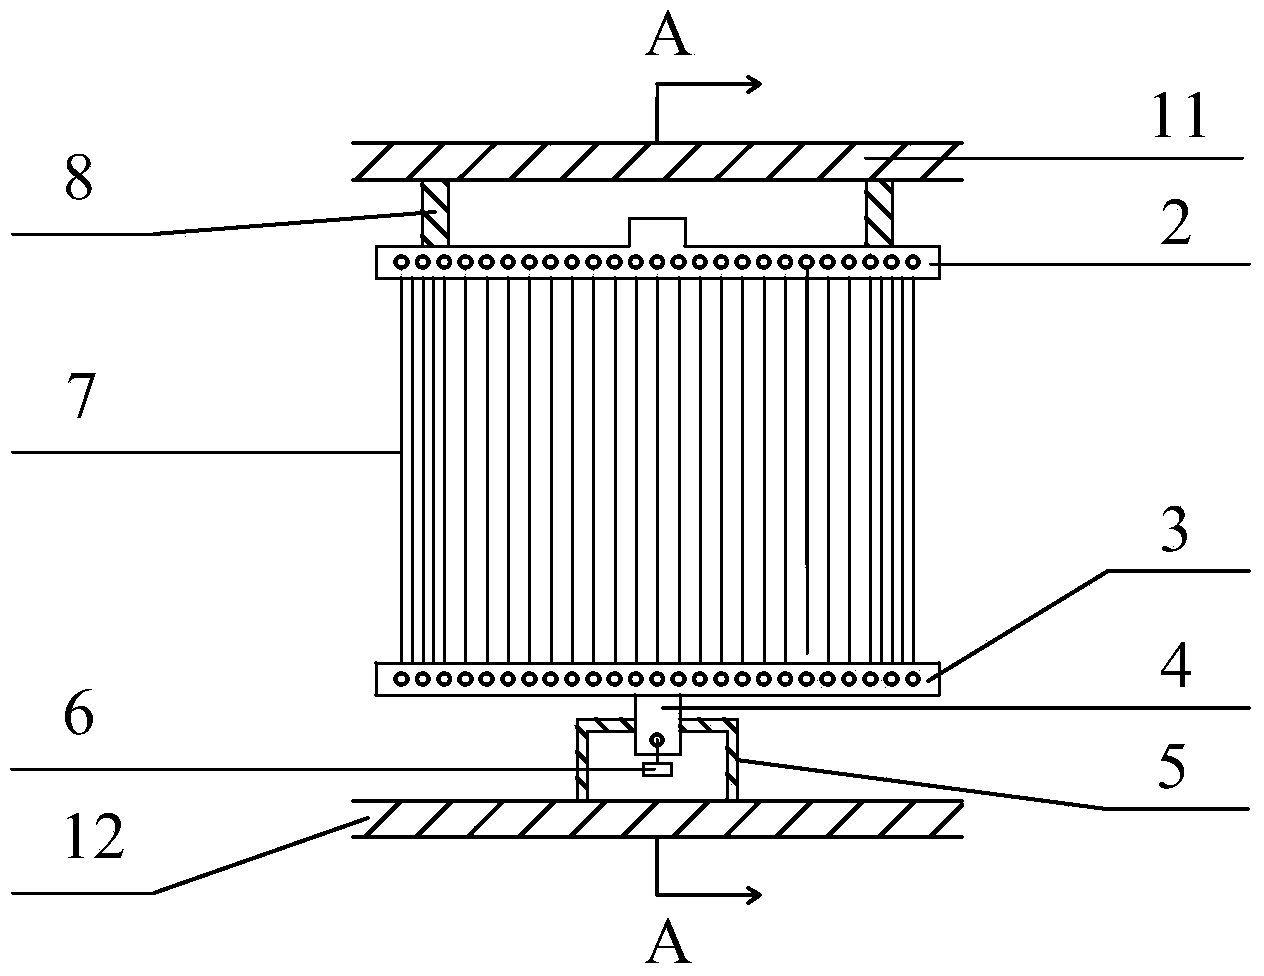 Vertical-layout single-array hot wire device for preparing diamond film